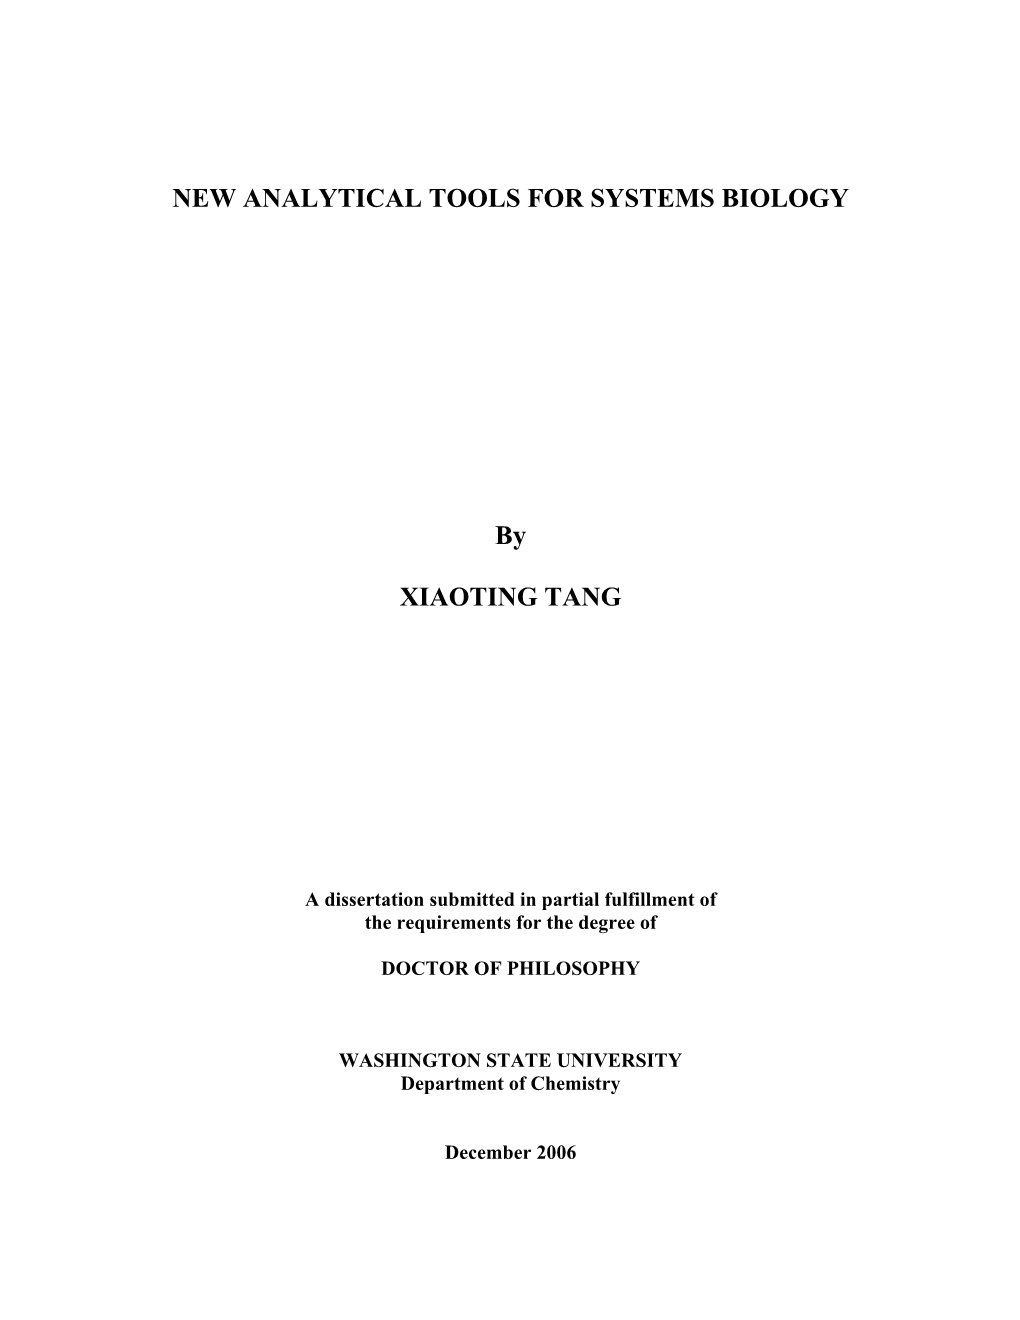 NEW ANALYTICAL TOOLS for SYSTEMS BIOLOGY by XIAOTING